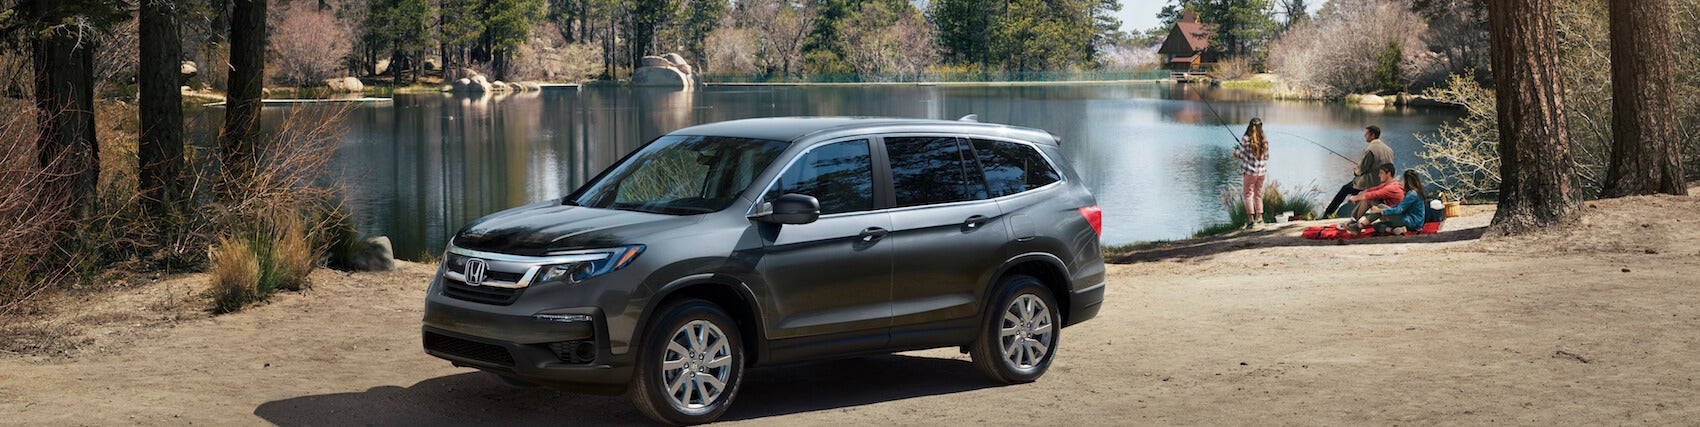 Used Honda Pilot for sale Plainfield, IN